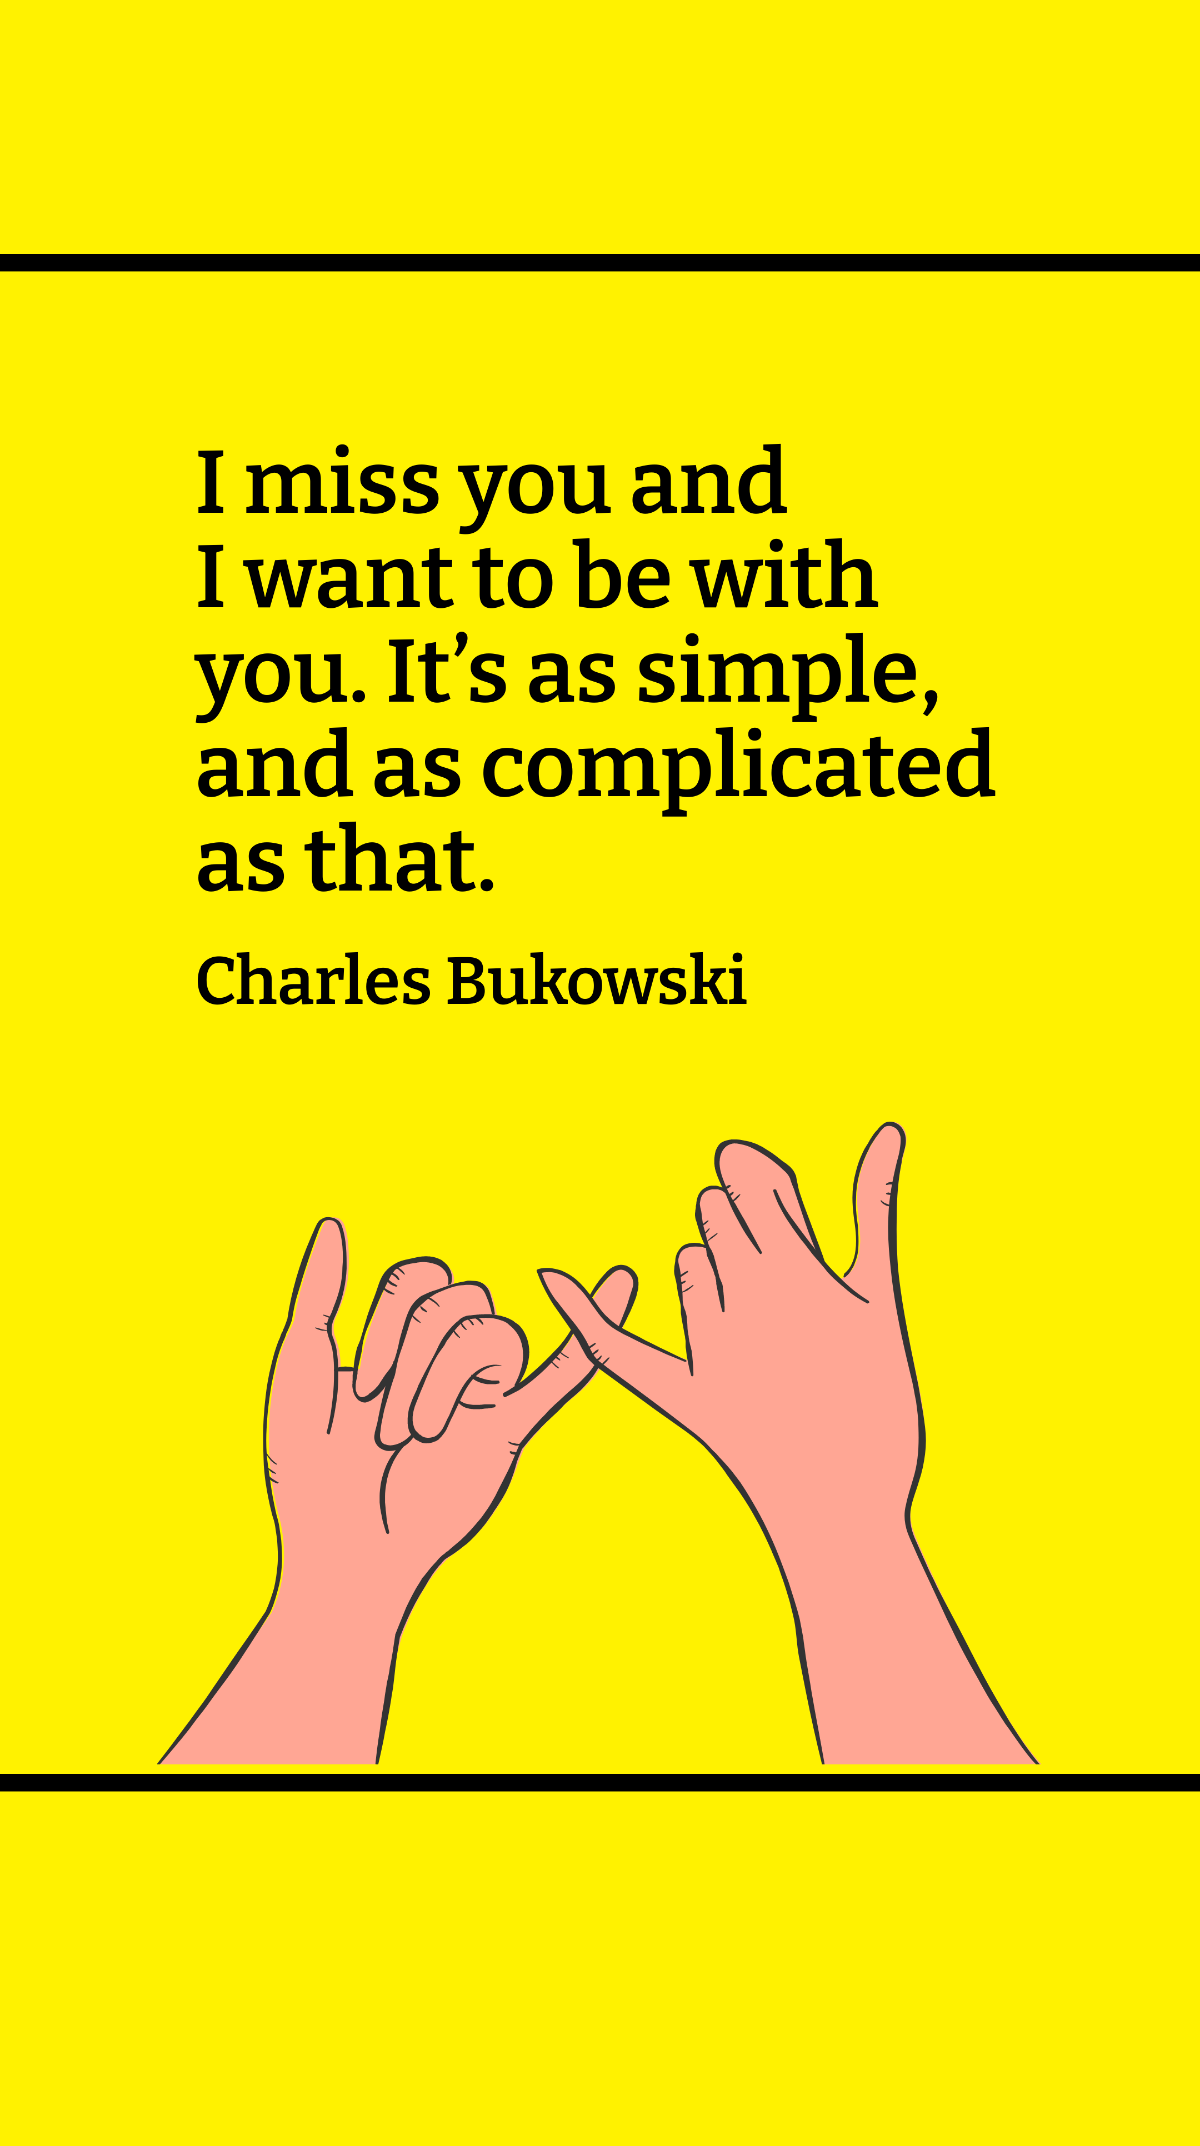 Charles Bukowski - I miss you and I want to be with you. It’s as simple, and as complicated as that.